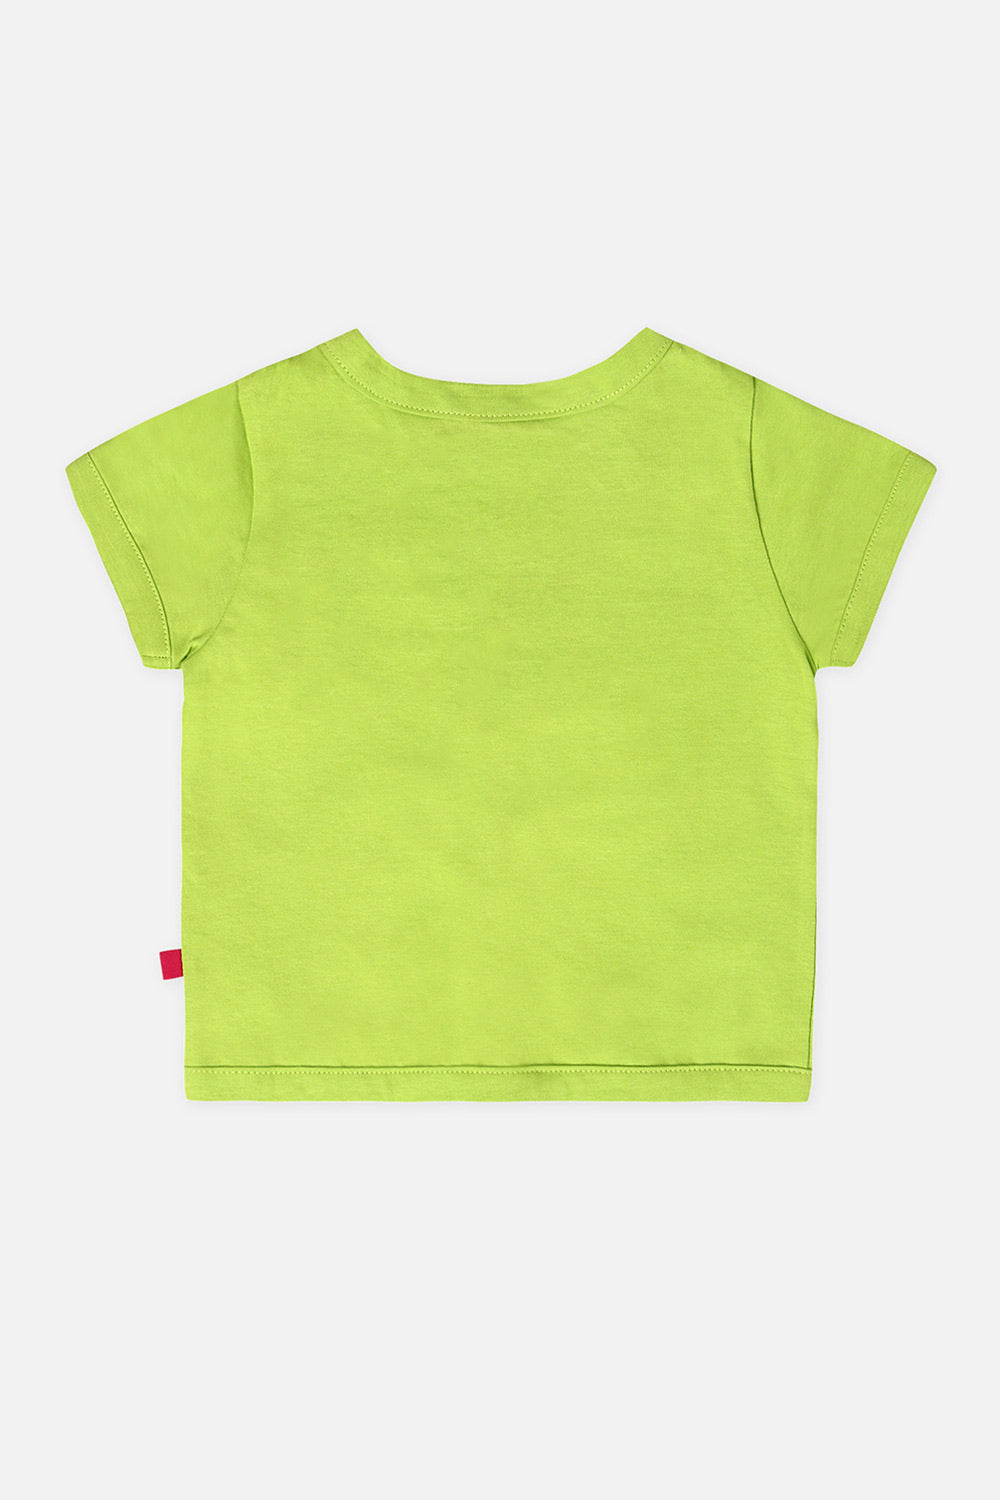 Oh Baby T Shirts Front Open Light Green-Ts16